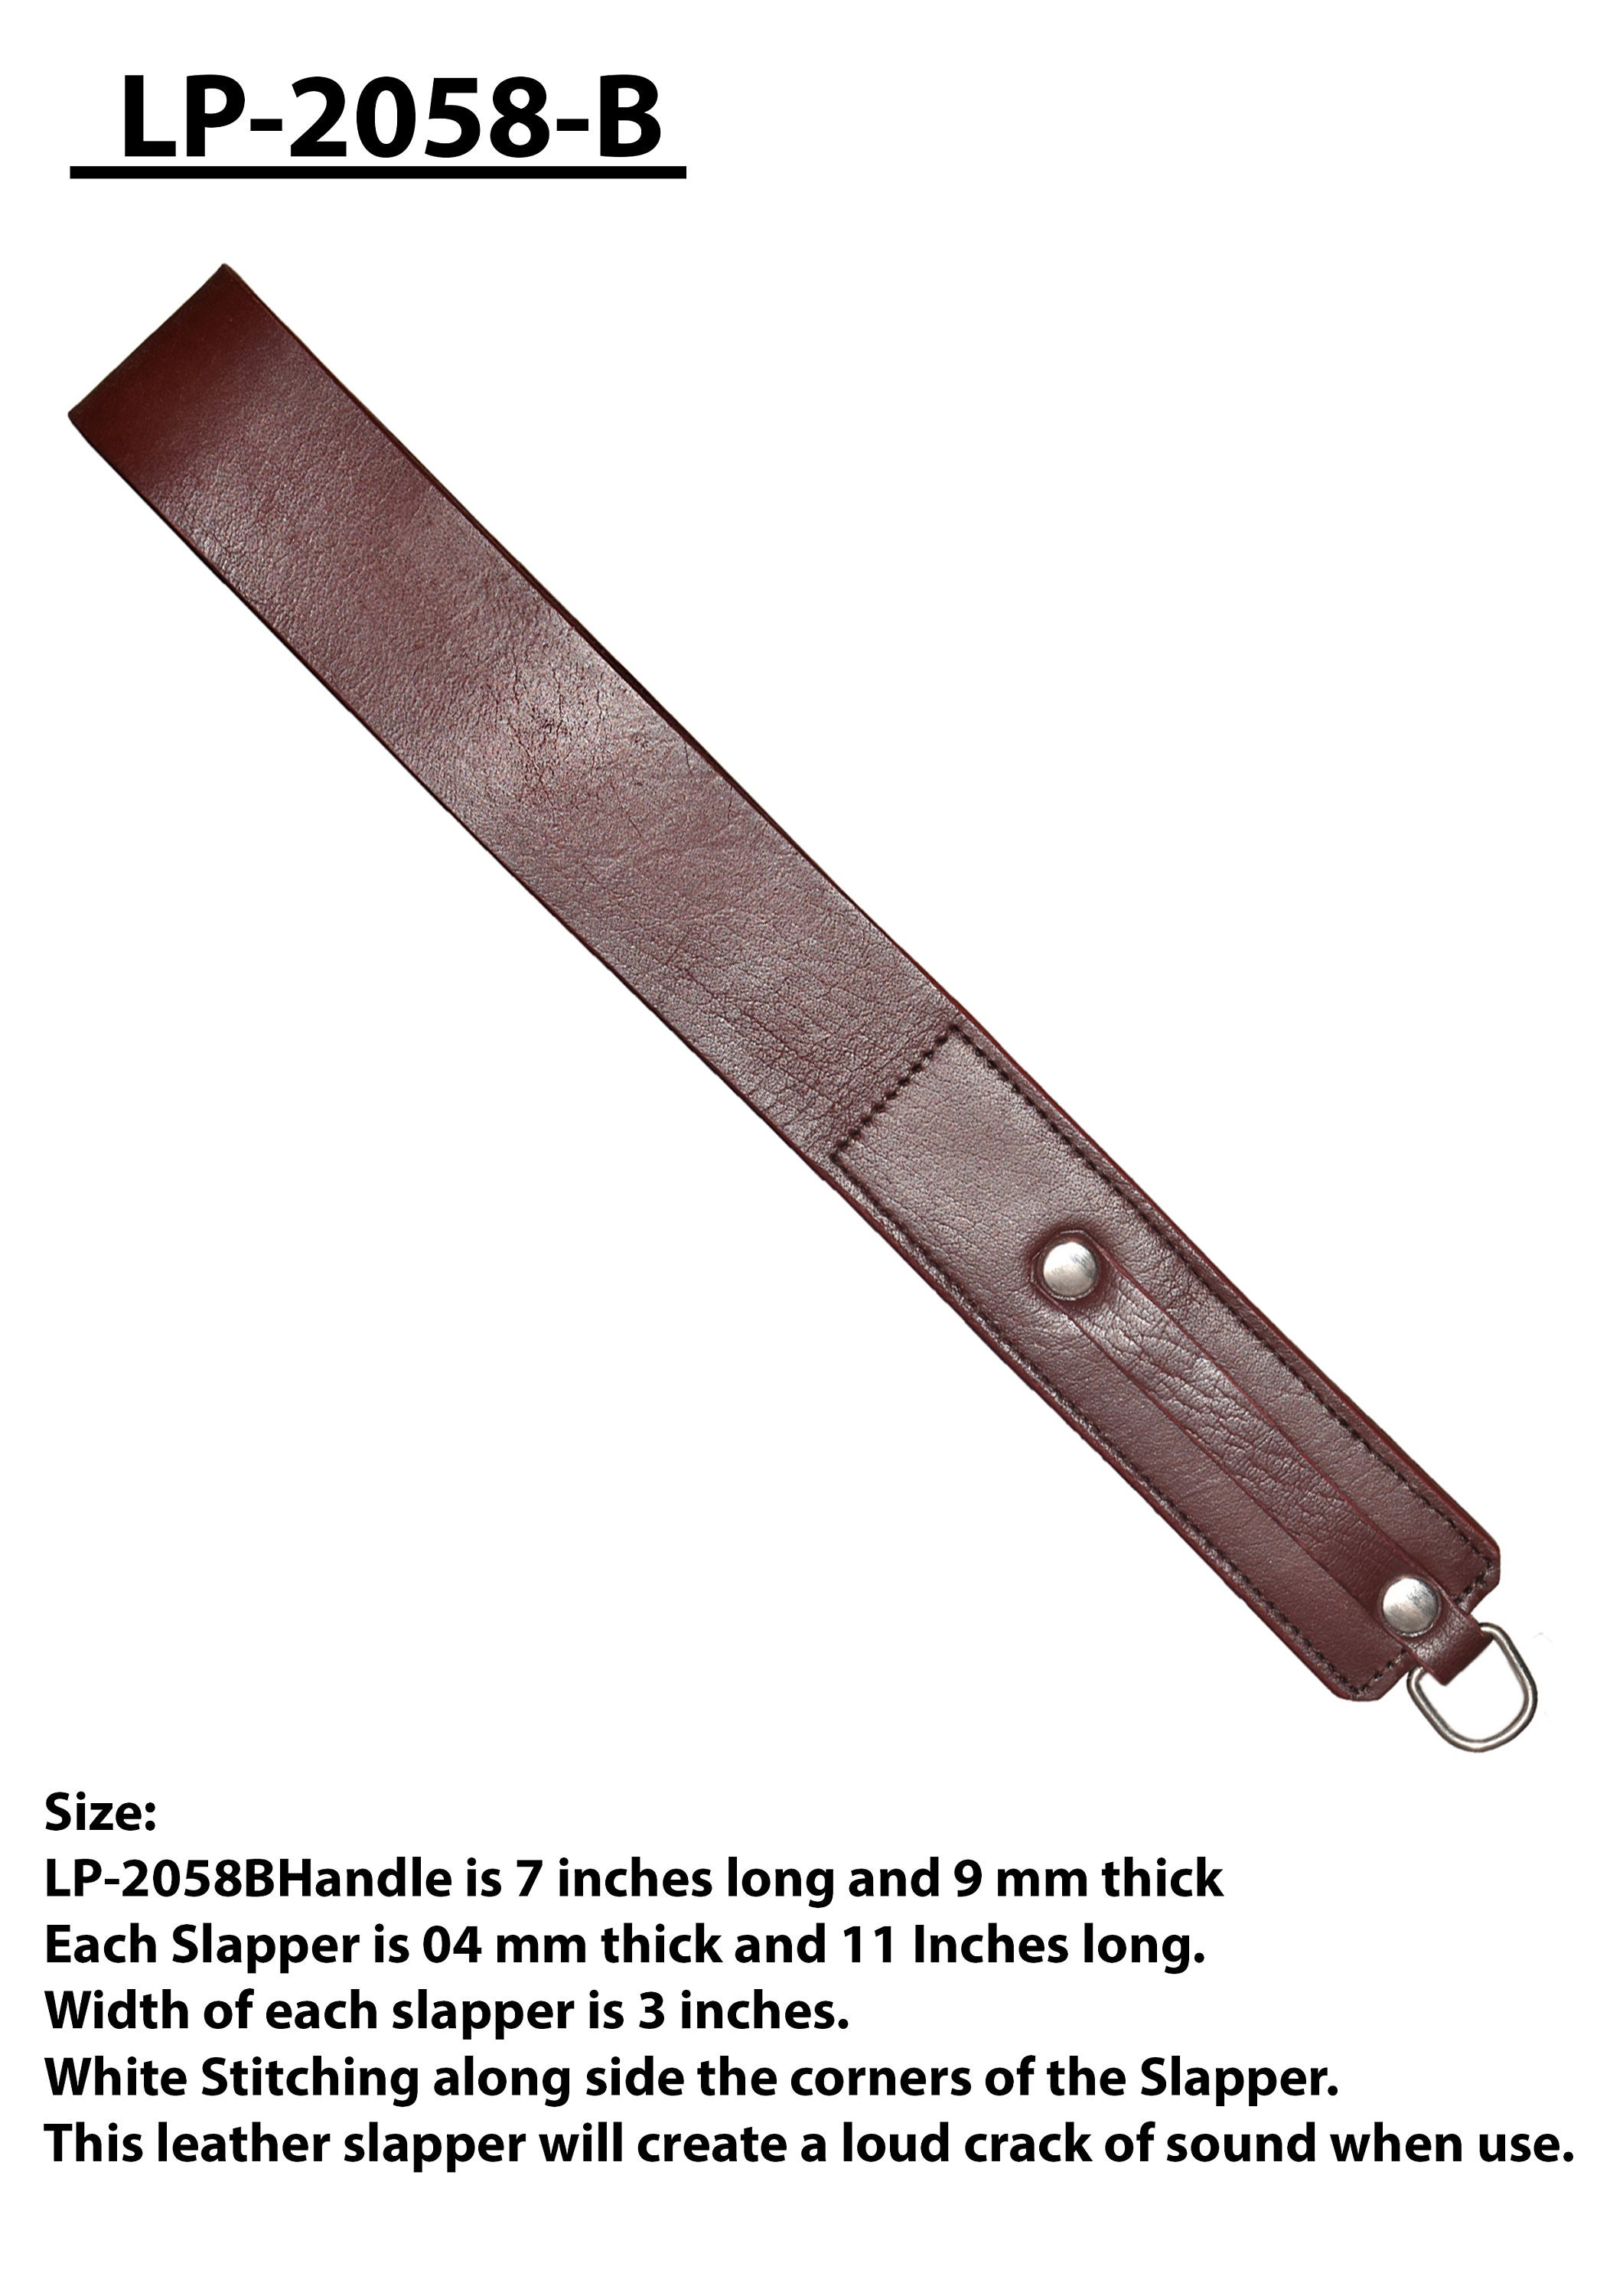 Leather Tawse Paddle from Passion Craft Store